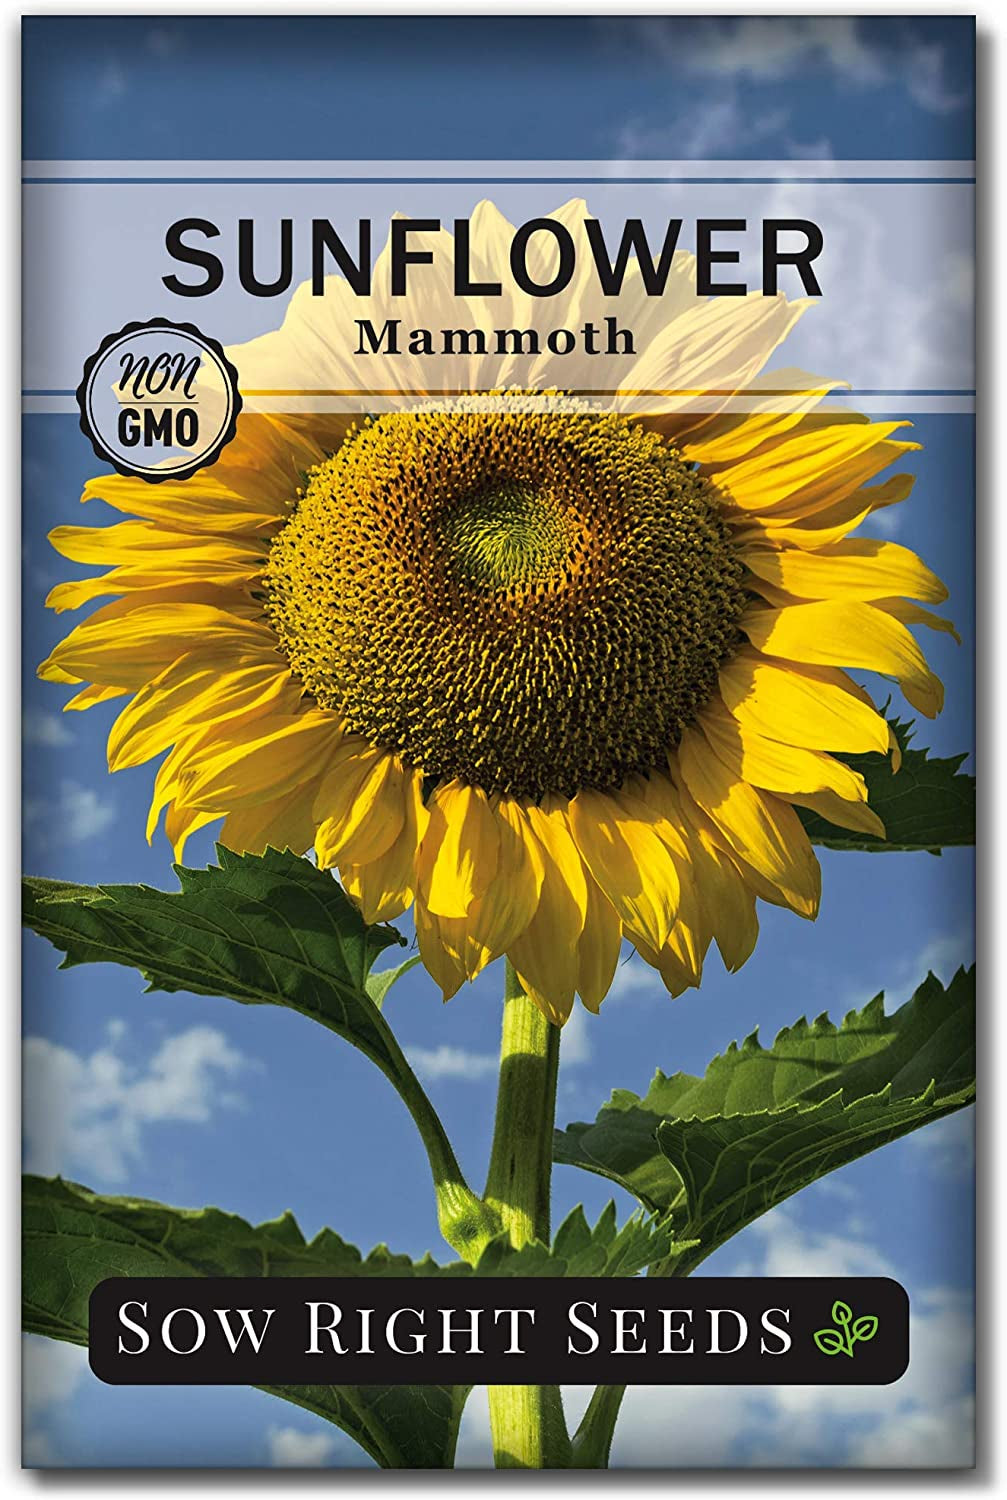 - Mammoth Sunflower Seeds to Plant - Grow Giant Sunflowers in Your Garden - Non-Gmo Heirloom Seeds for Planting an Outdoor Garden - Bright Yellow Blooms - Attract Bees and Birds